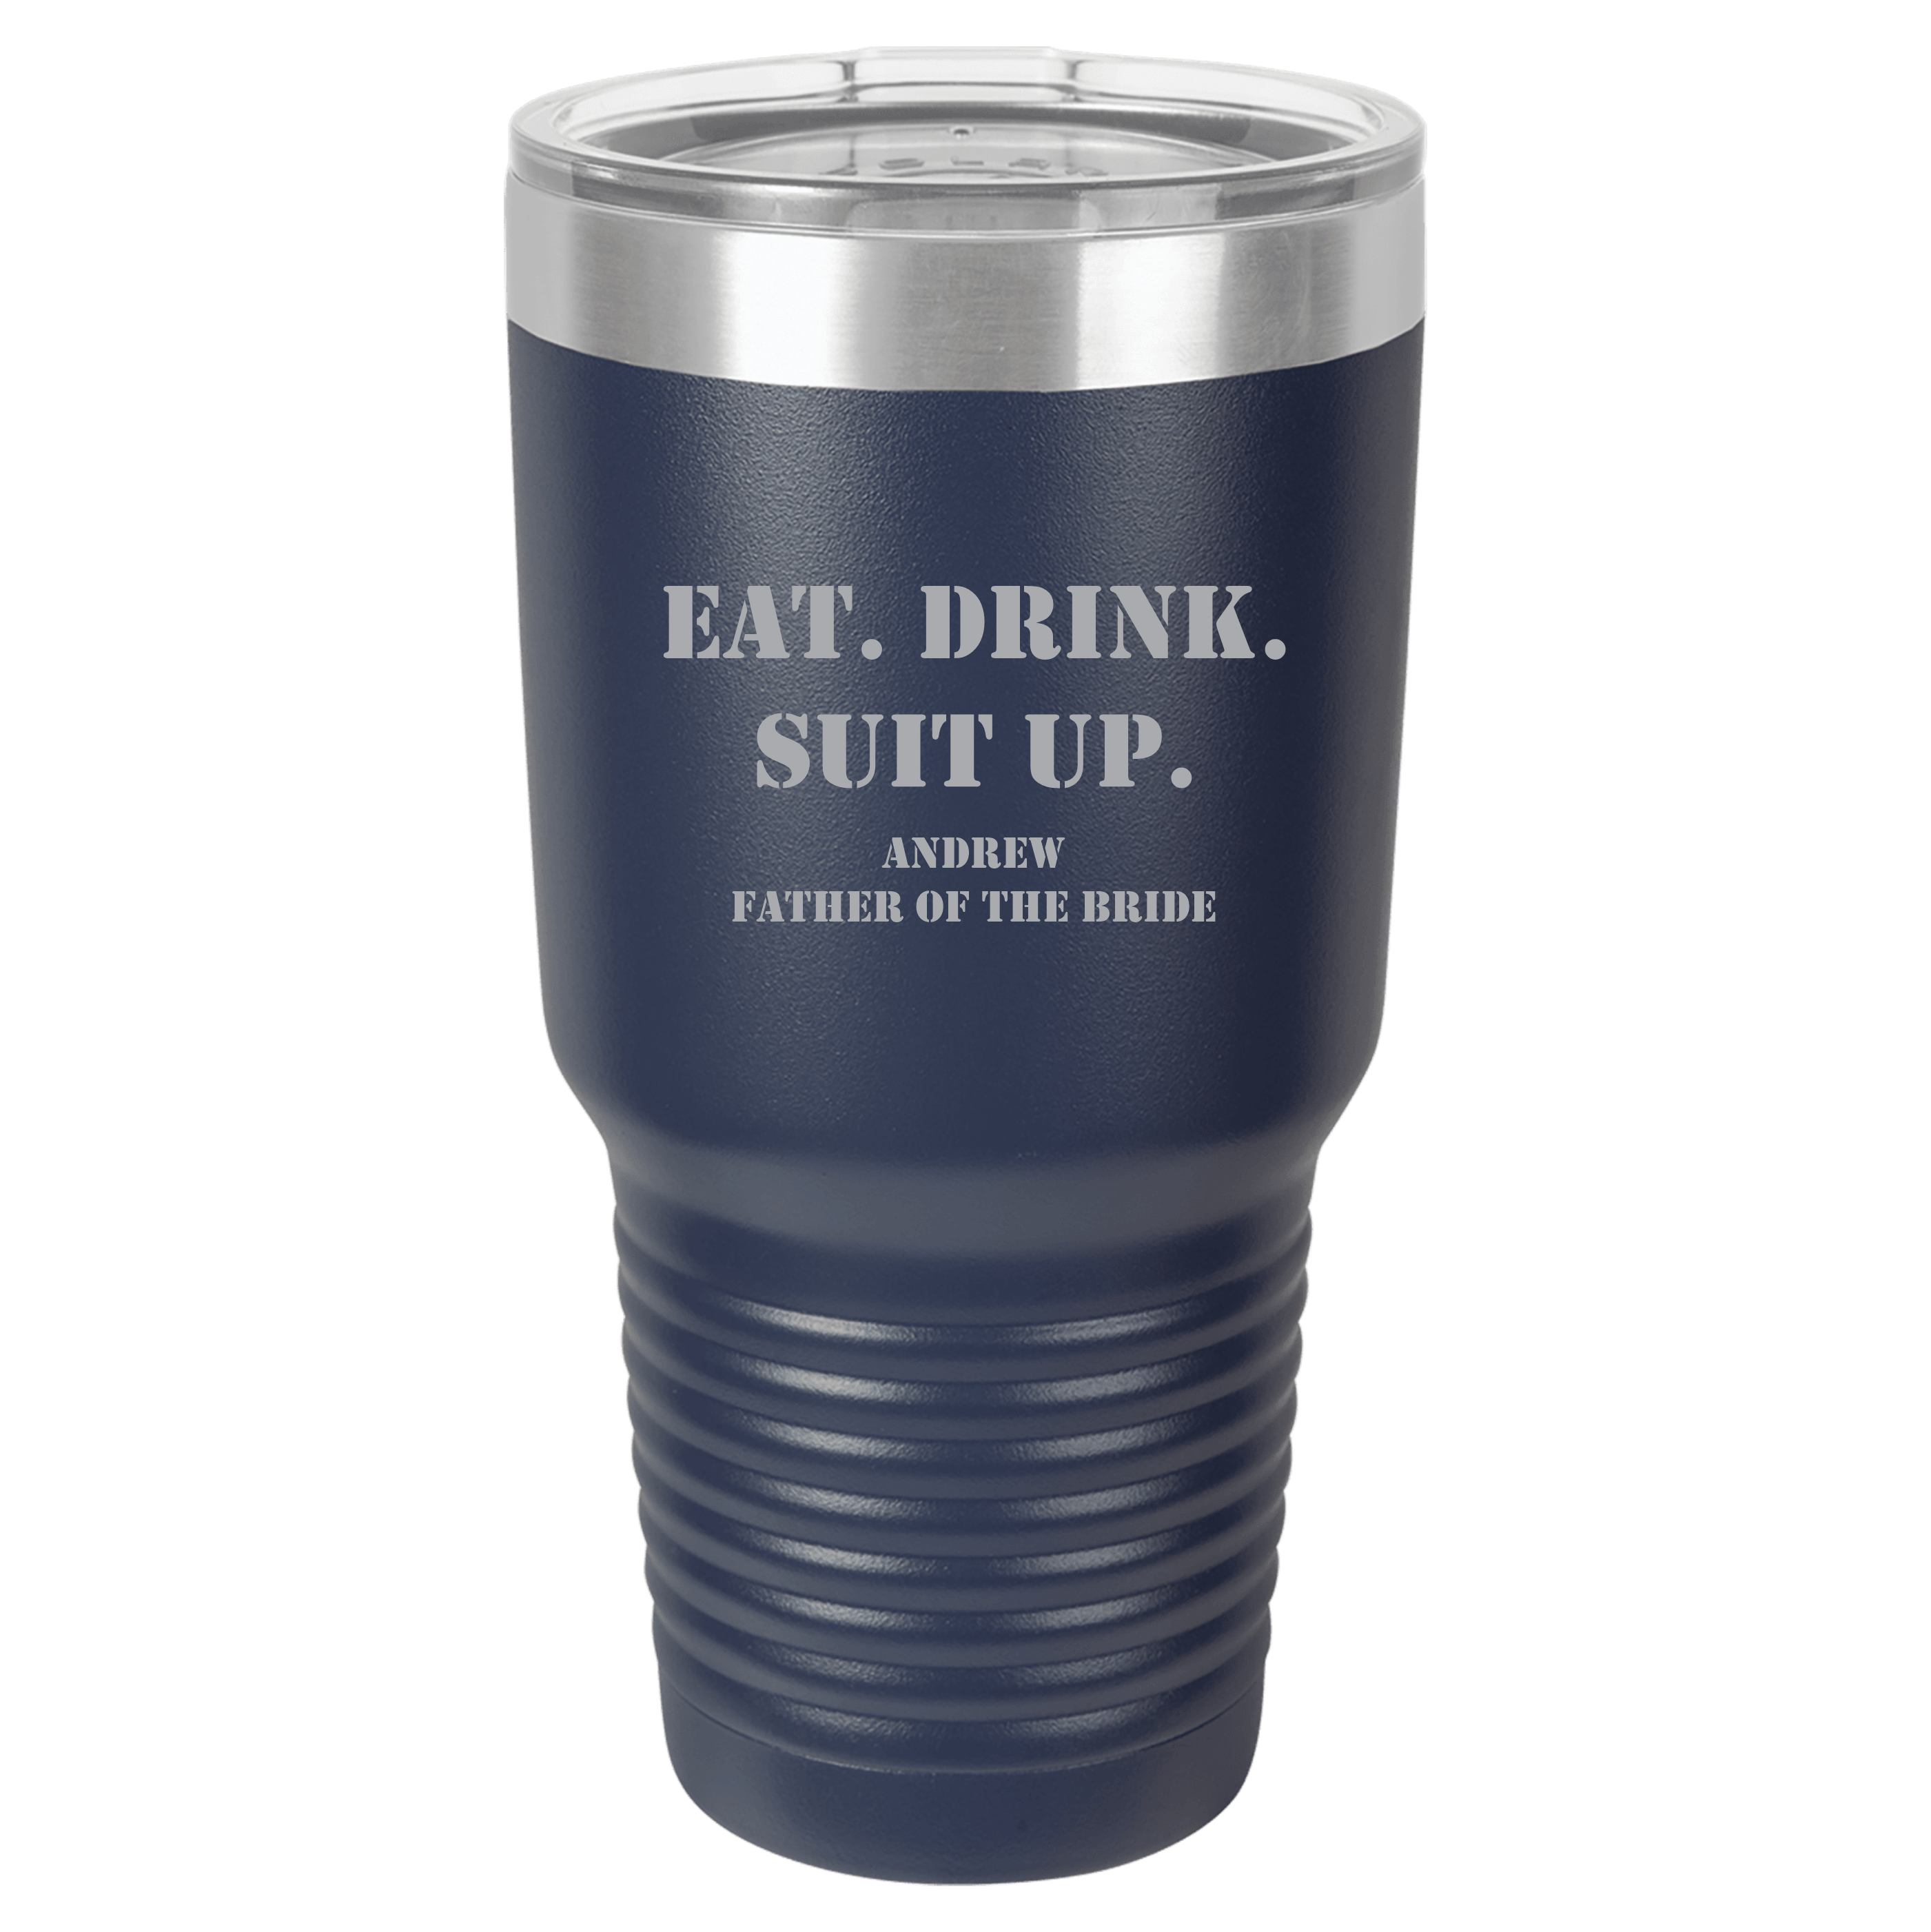 30oz. Eat Drink Suit Up Tumbler - Father of the Groom or Bride Tumbler - Laser Engraved - High Quality